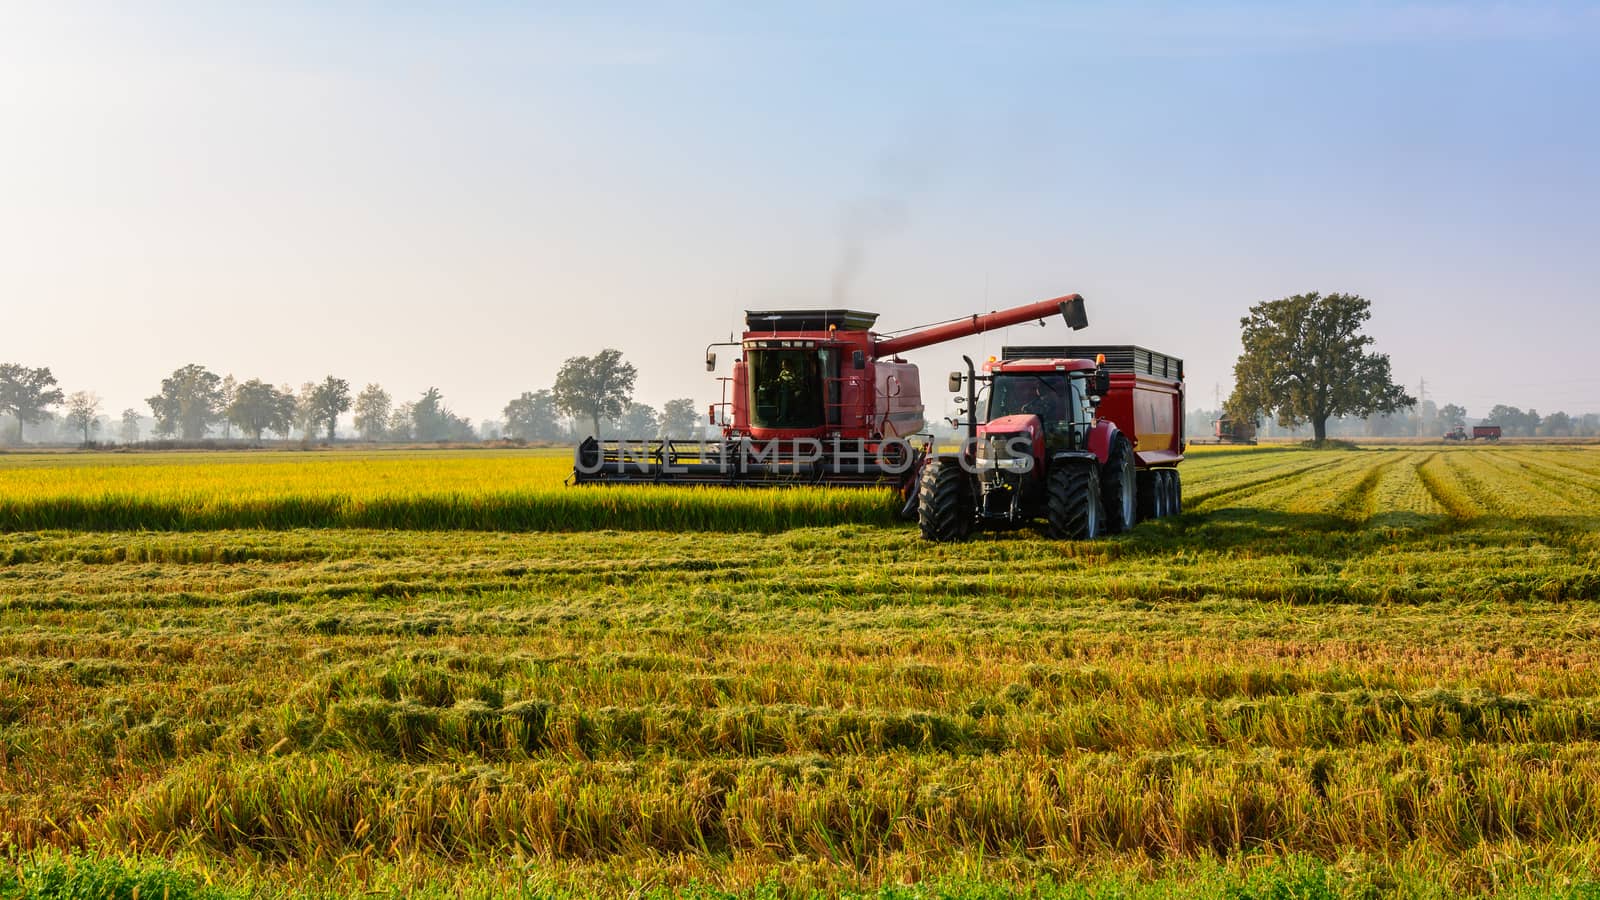 Every year in September takes place the rice harvest in Lombardy